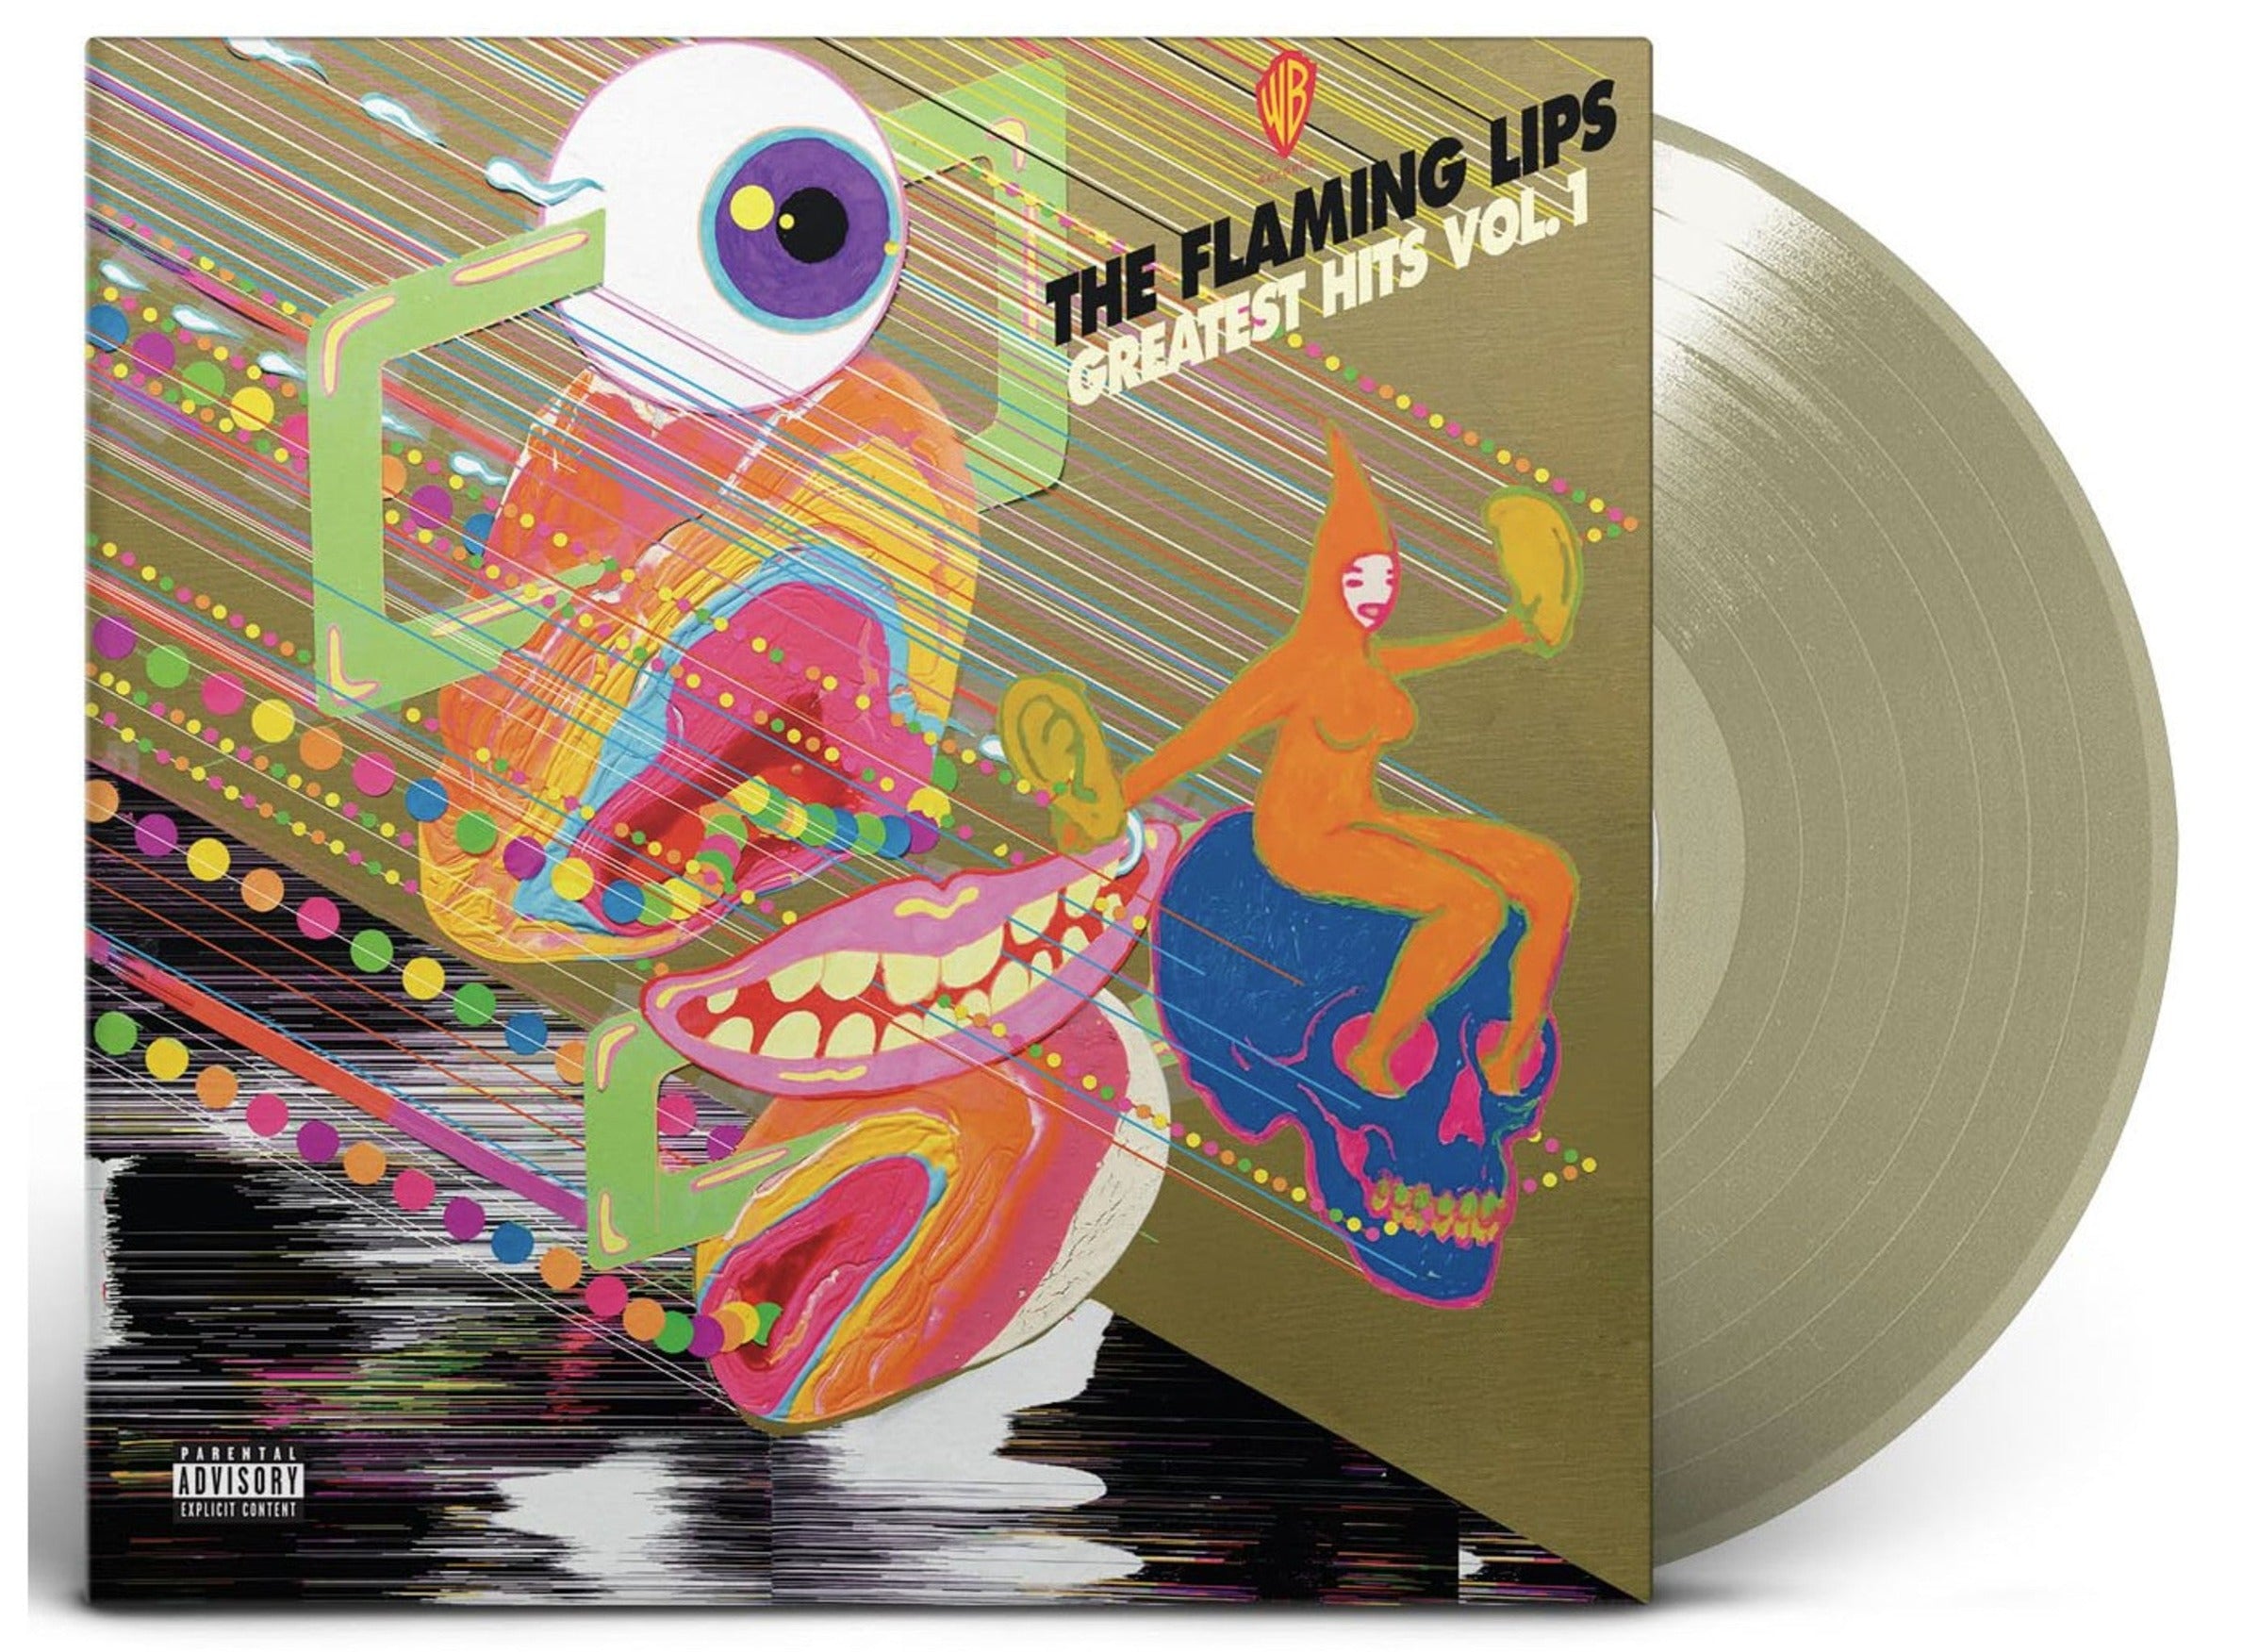 Order The Flaming Lips - The Flaming Lips Greatest Hits Vol. 1 (Gold Vinyl)